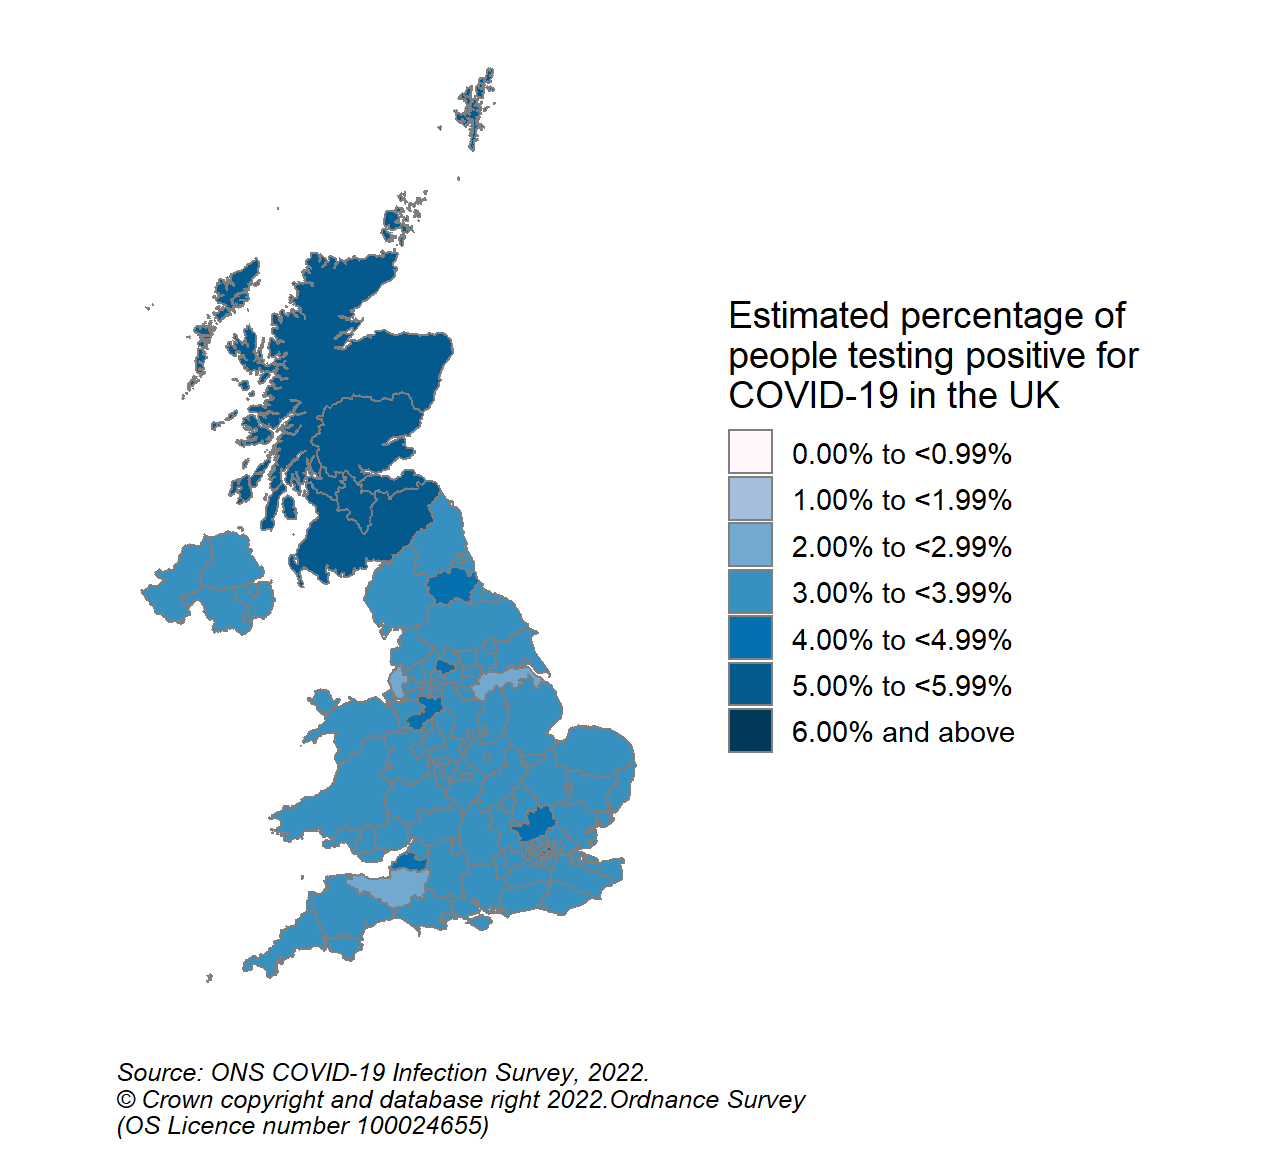 A colour coded map of the UK showing modelled estimates of the percentage of people living in private households within each COVID-19 Infection Survey sub-region who would have tested positive for COVID-19 in the week 18 to 24 June 2022.  In Scotland, sub-regions are comprised of Health Boards. Sub-region 123 contains NHS Grampian, NHS Highland, NHS Orkney, NHS Shetland and NHS Western Isles, sub-region 124 contains NHS Fife, NHS Forth Valley and NHS Tayside, sub-region 125 contains NHS Greater Glasgow & Clyde, sub-region 126 contains NHS Lothian, sub-region 127 contains NHS Lanarkshire, and sub-region 128 contains NHS Ayrshire & Arran, NHS Borders and NHS Dumfries & Galloway.  The map ranges from light blue for 2.00% to 2.99%, blue for 3.00% to 3.99%, dark blue for 4.00% to 4.99 and very dark blue for 5.00% to 5.99% estimated positivity. Scotland CIS sub-regions are marked with very dark blue (5.00% to 5.99%).